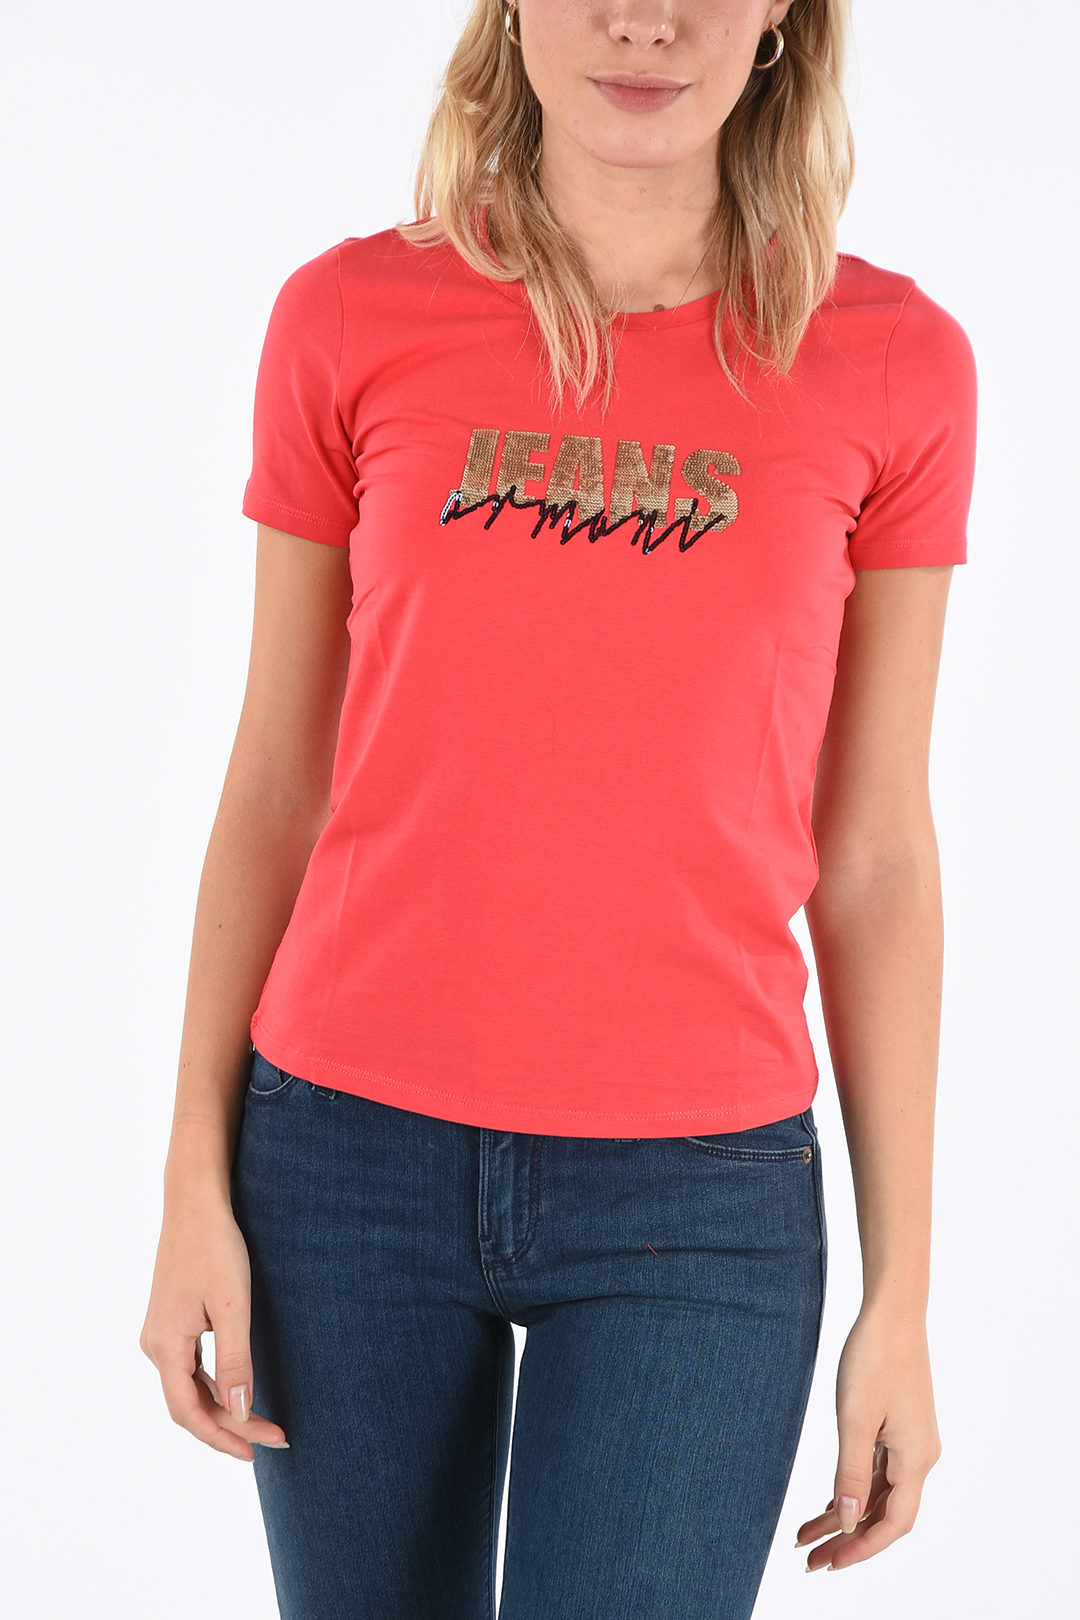 ARMANI JEANS Sequined T-shirt damen Glamood Outlet